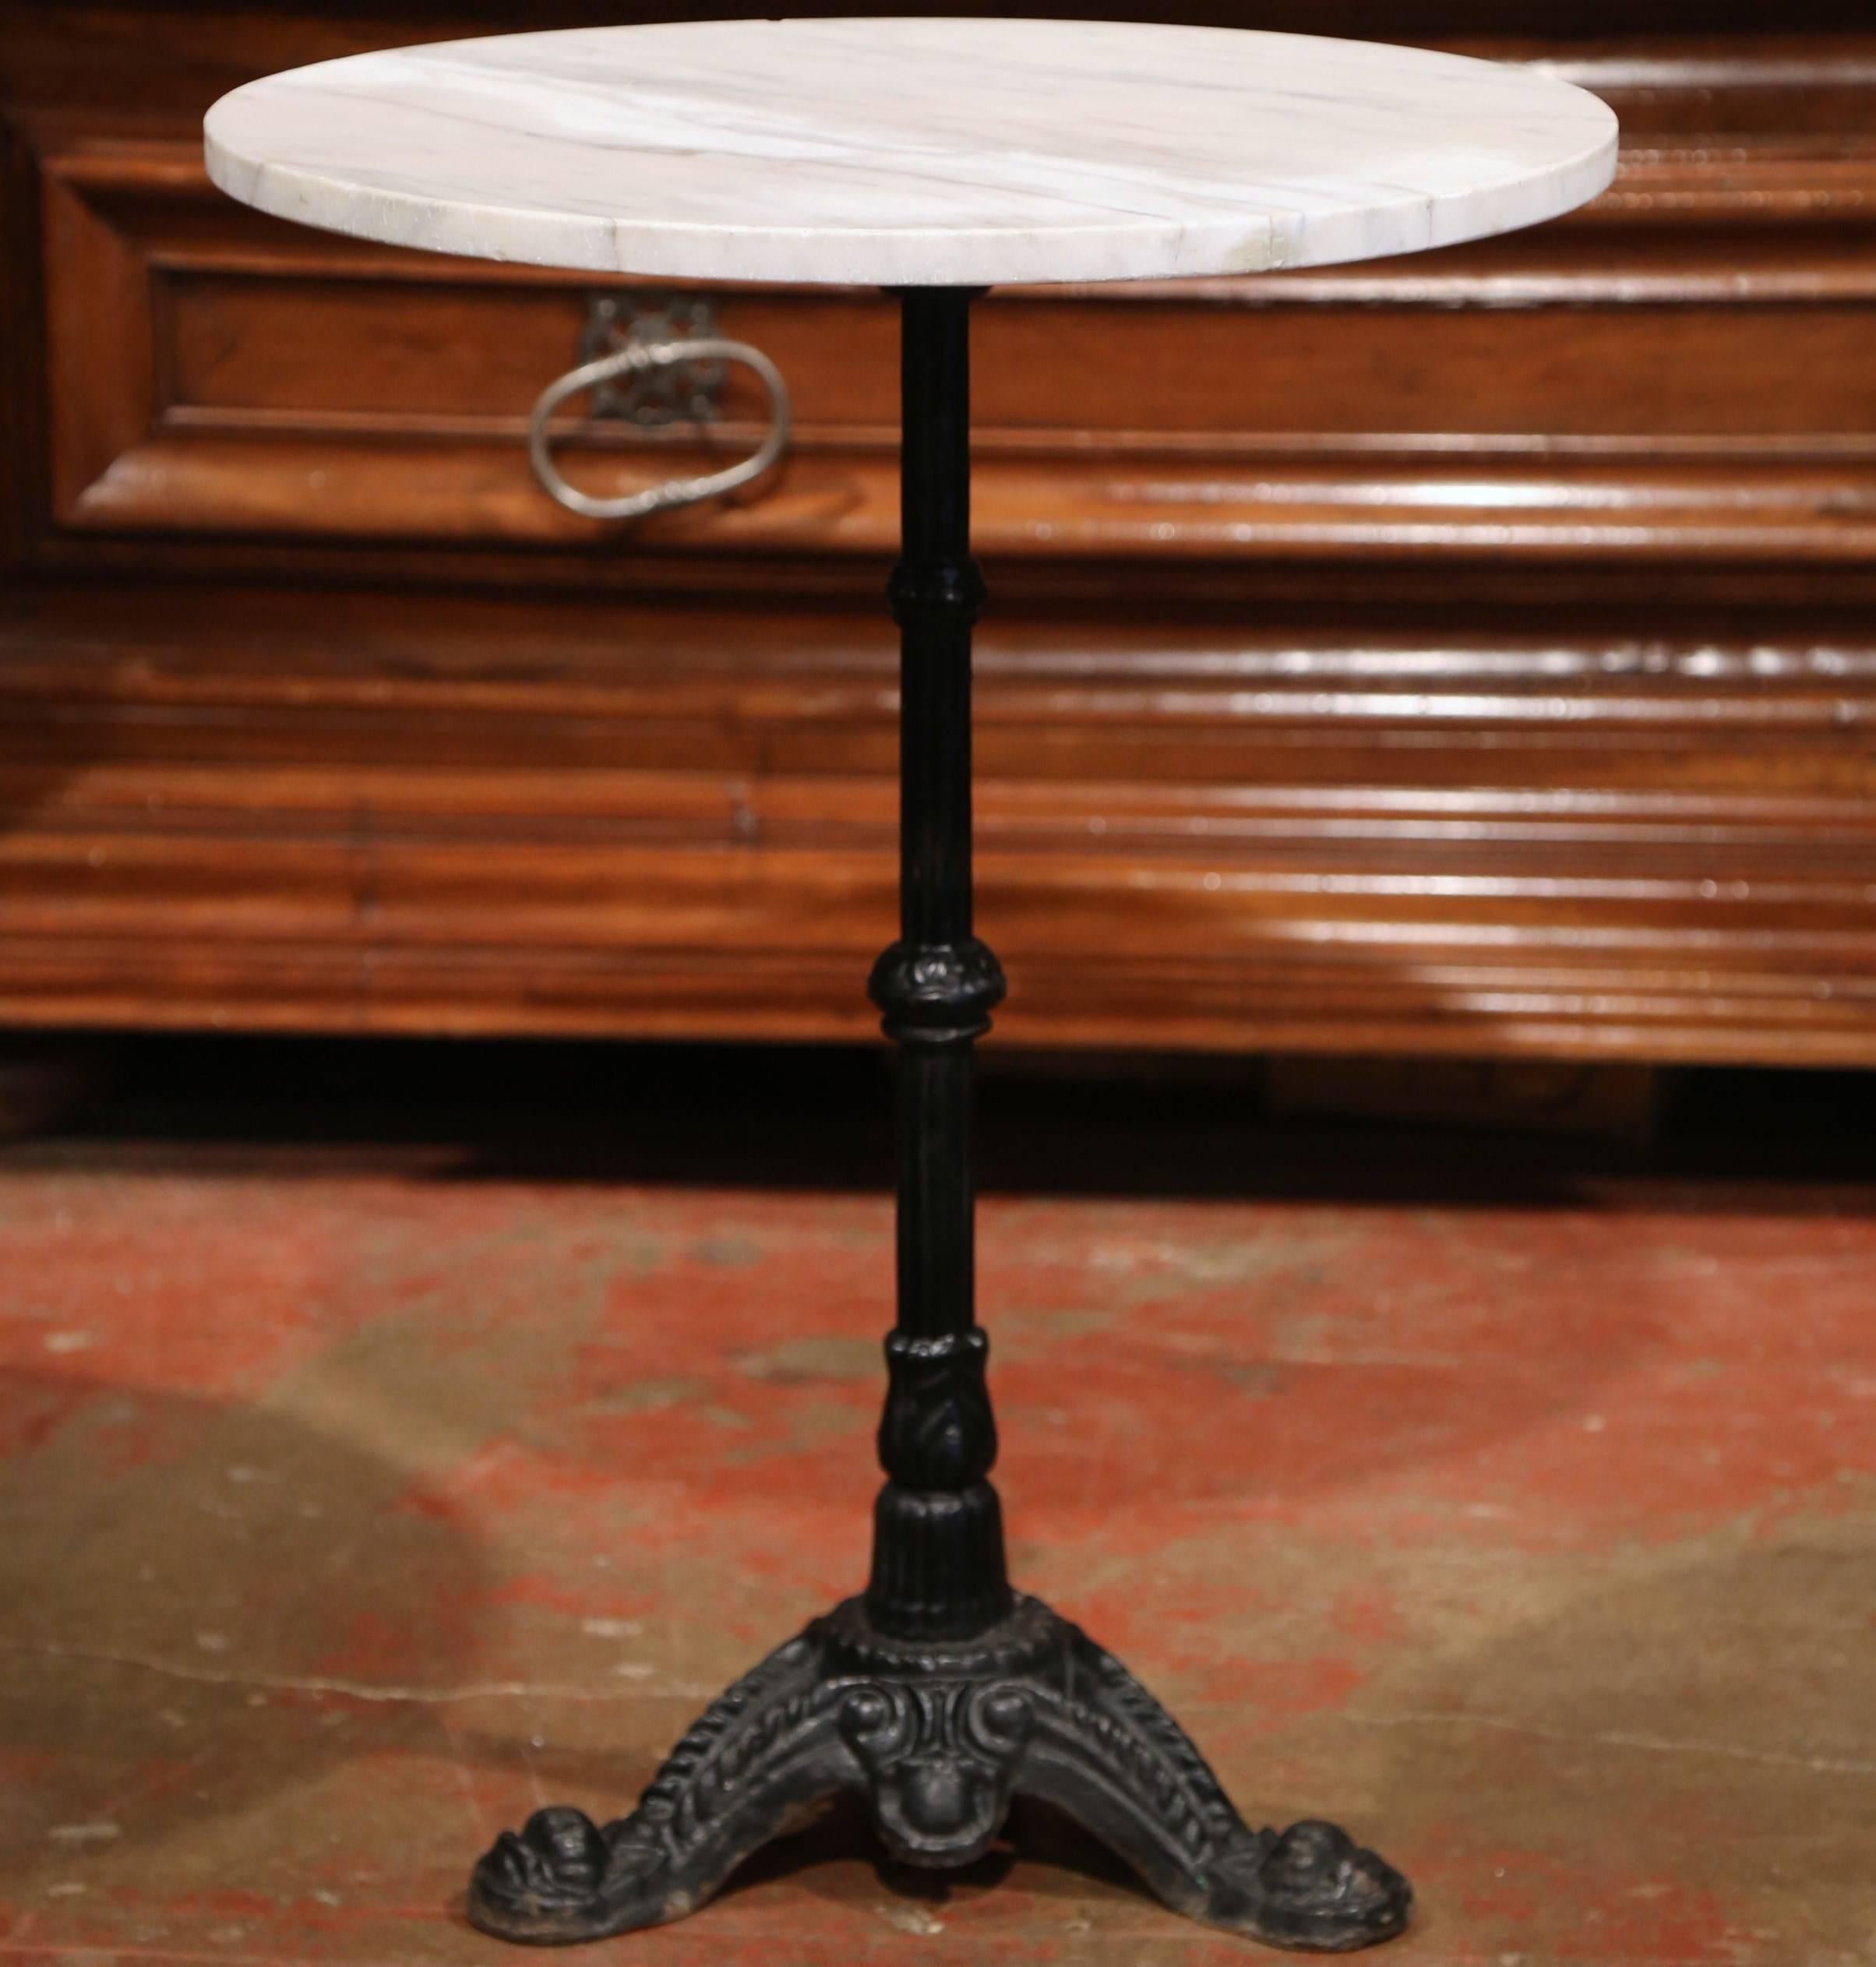 French 19th Century Parisian Iron and Marble Bistrot Table with Original Paint Finish